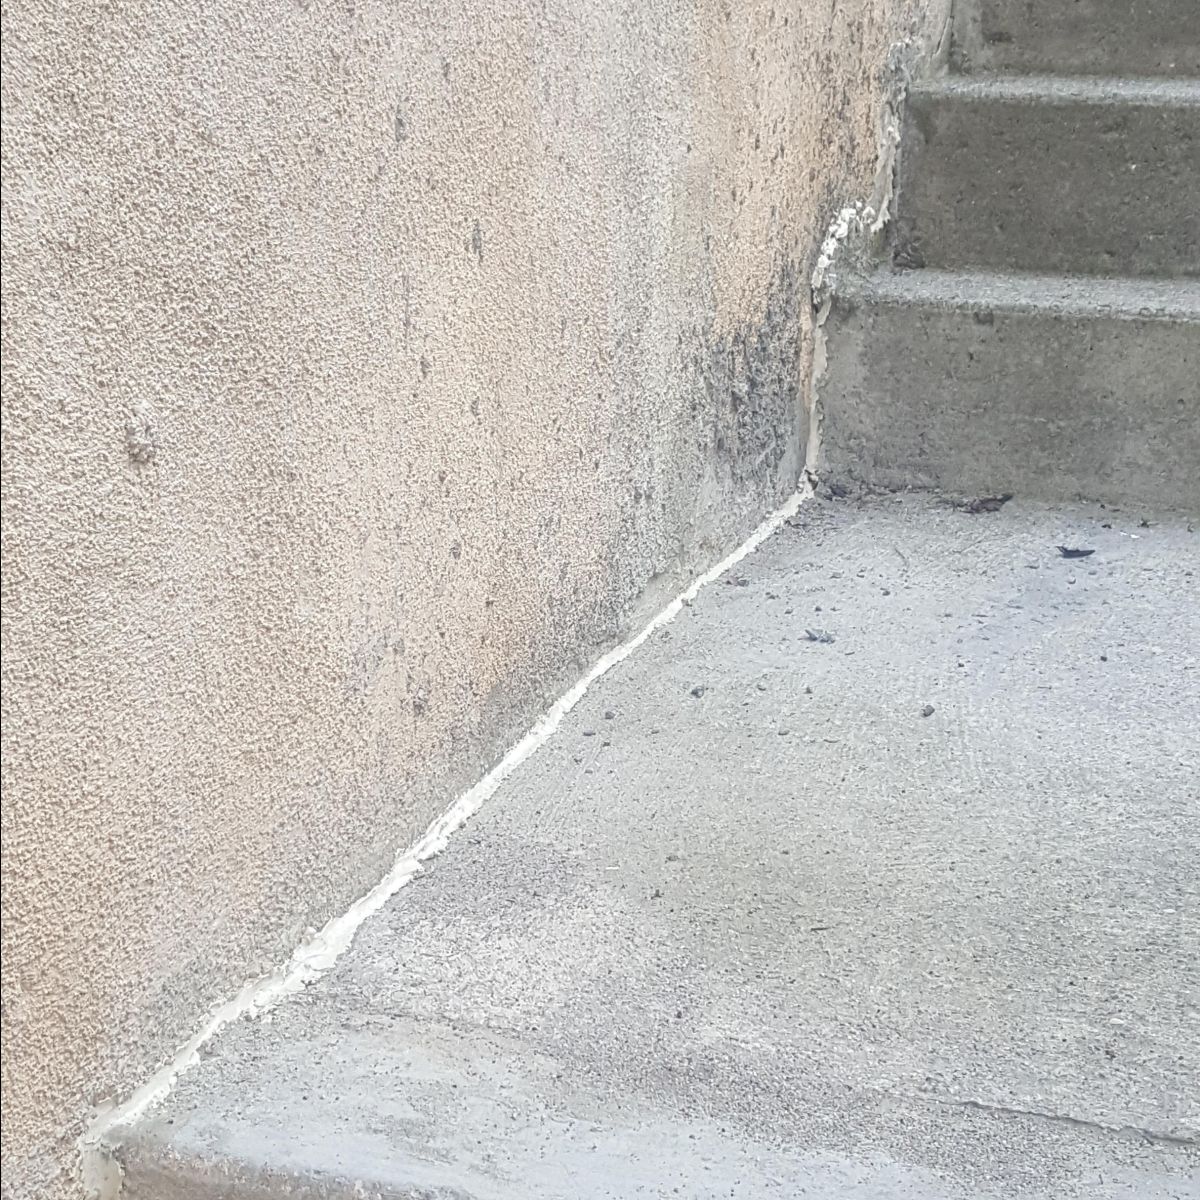 sealing cracks with a commercial grade sealant.